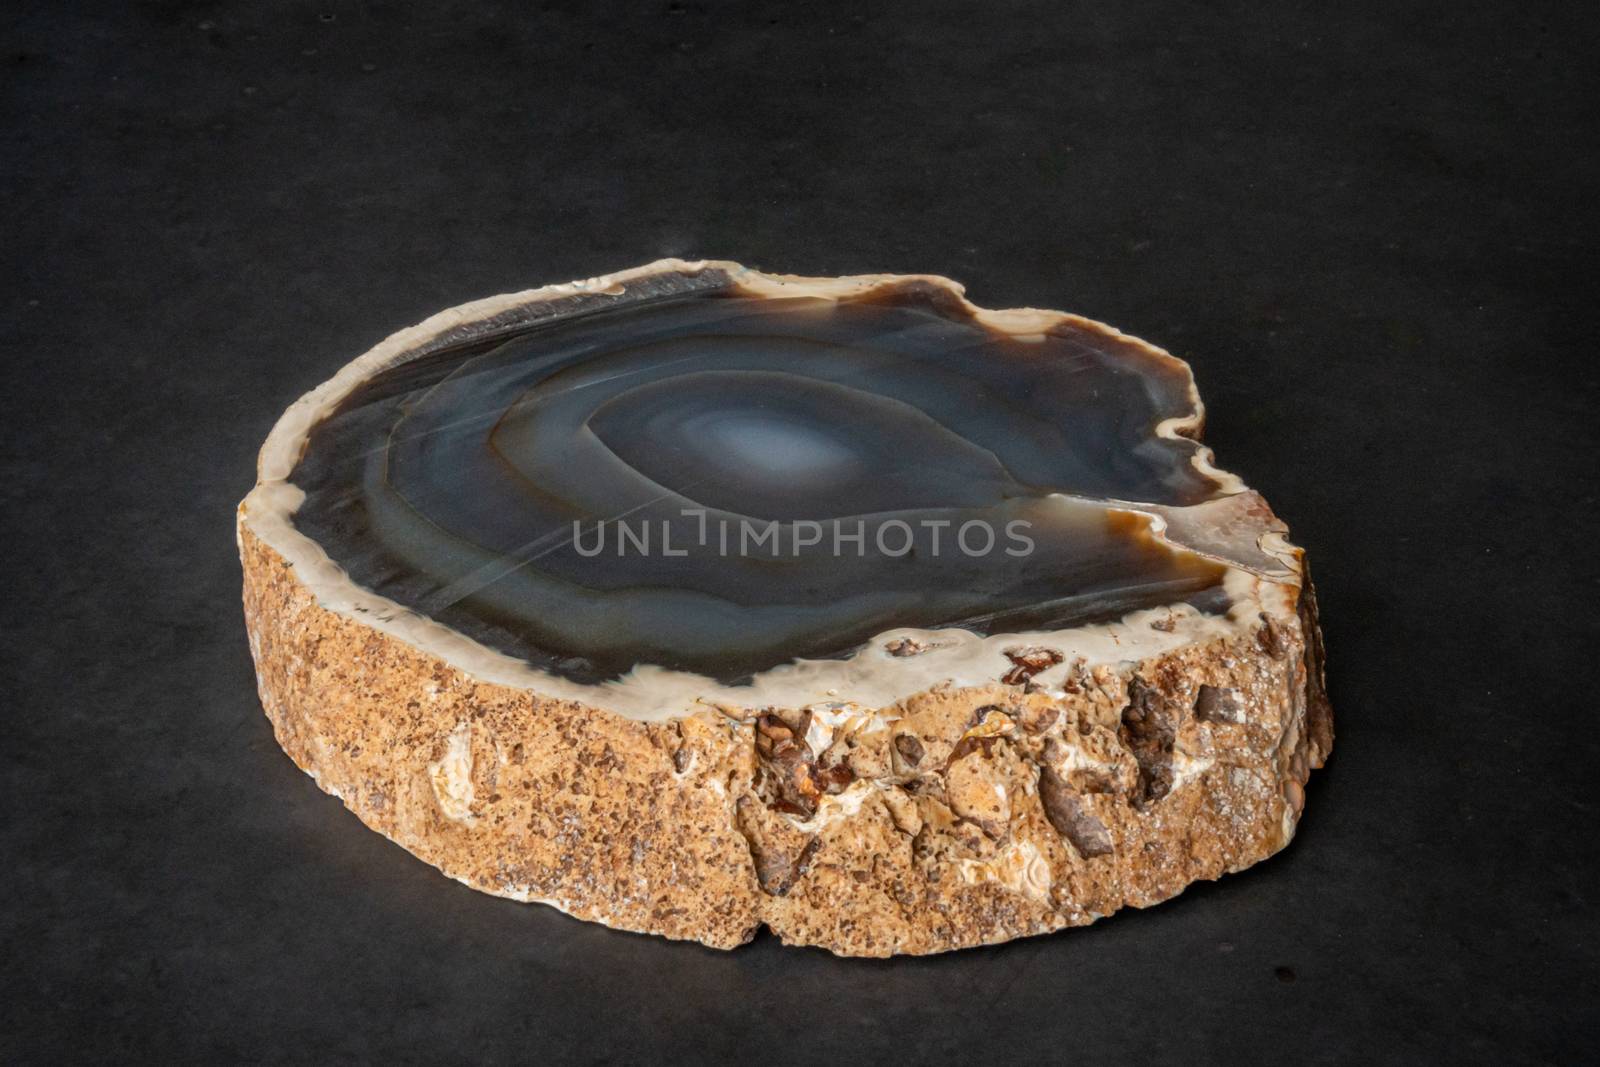 Slice of Geode blue colorful gemstone looking like normal rock from outside not hollow inside